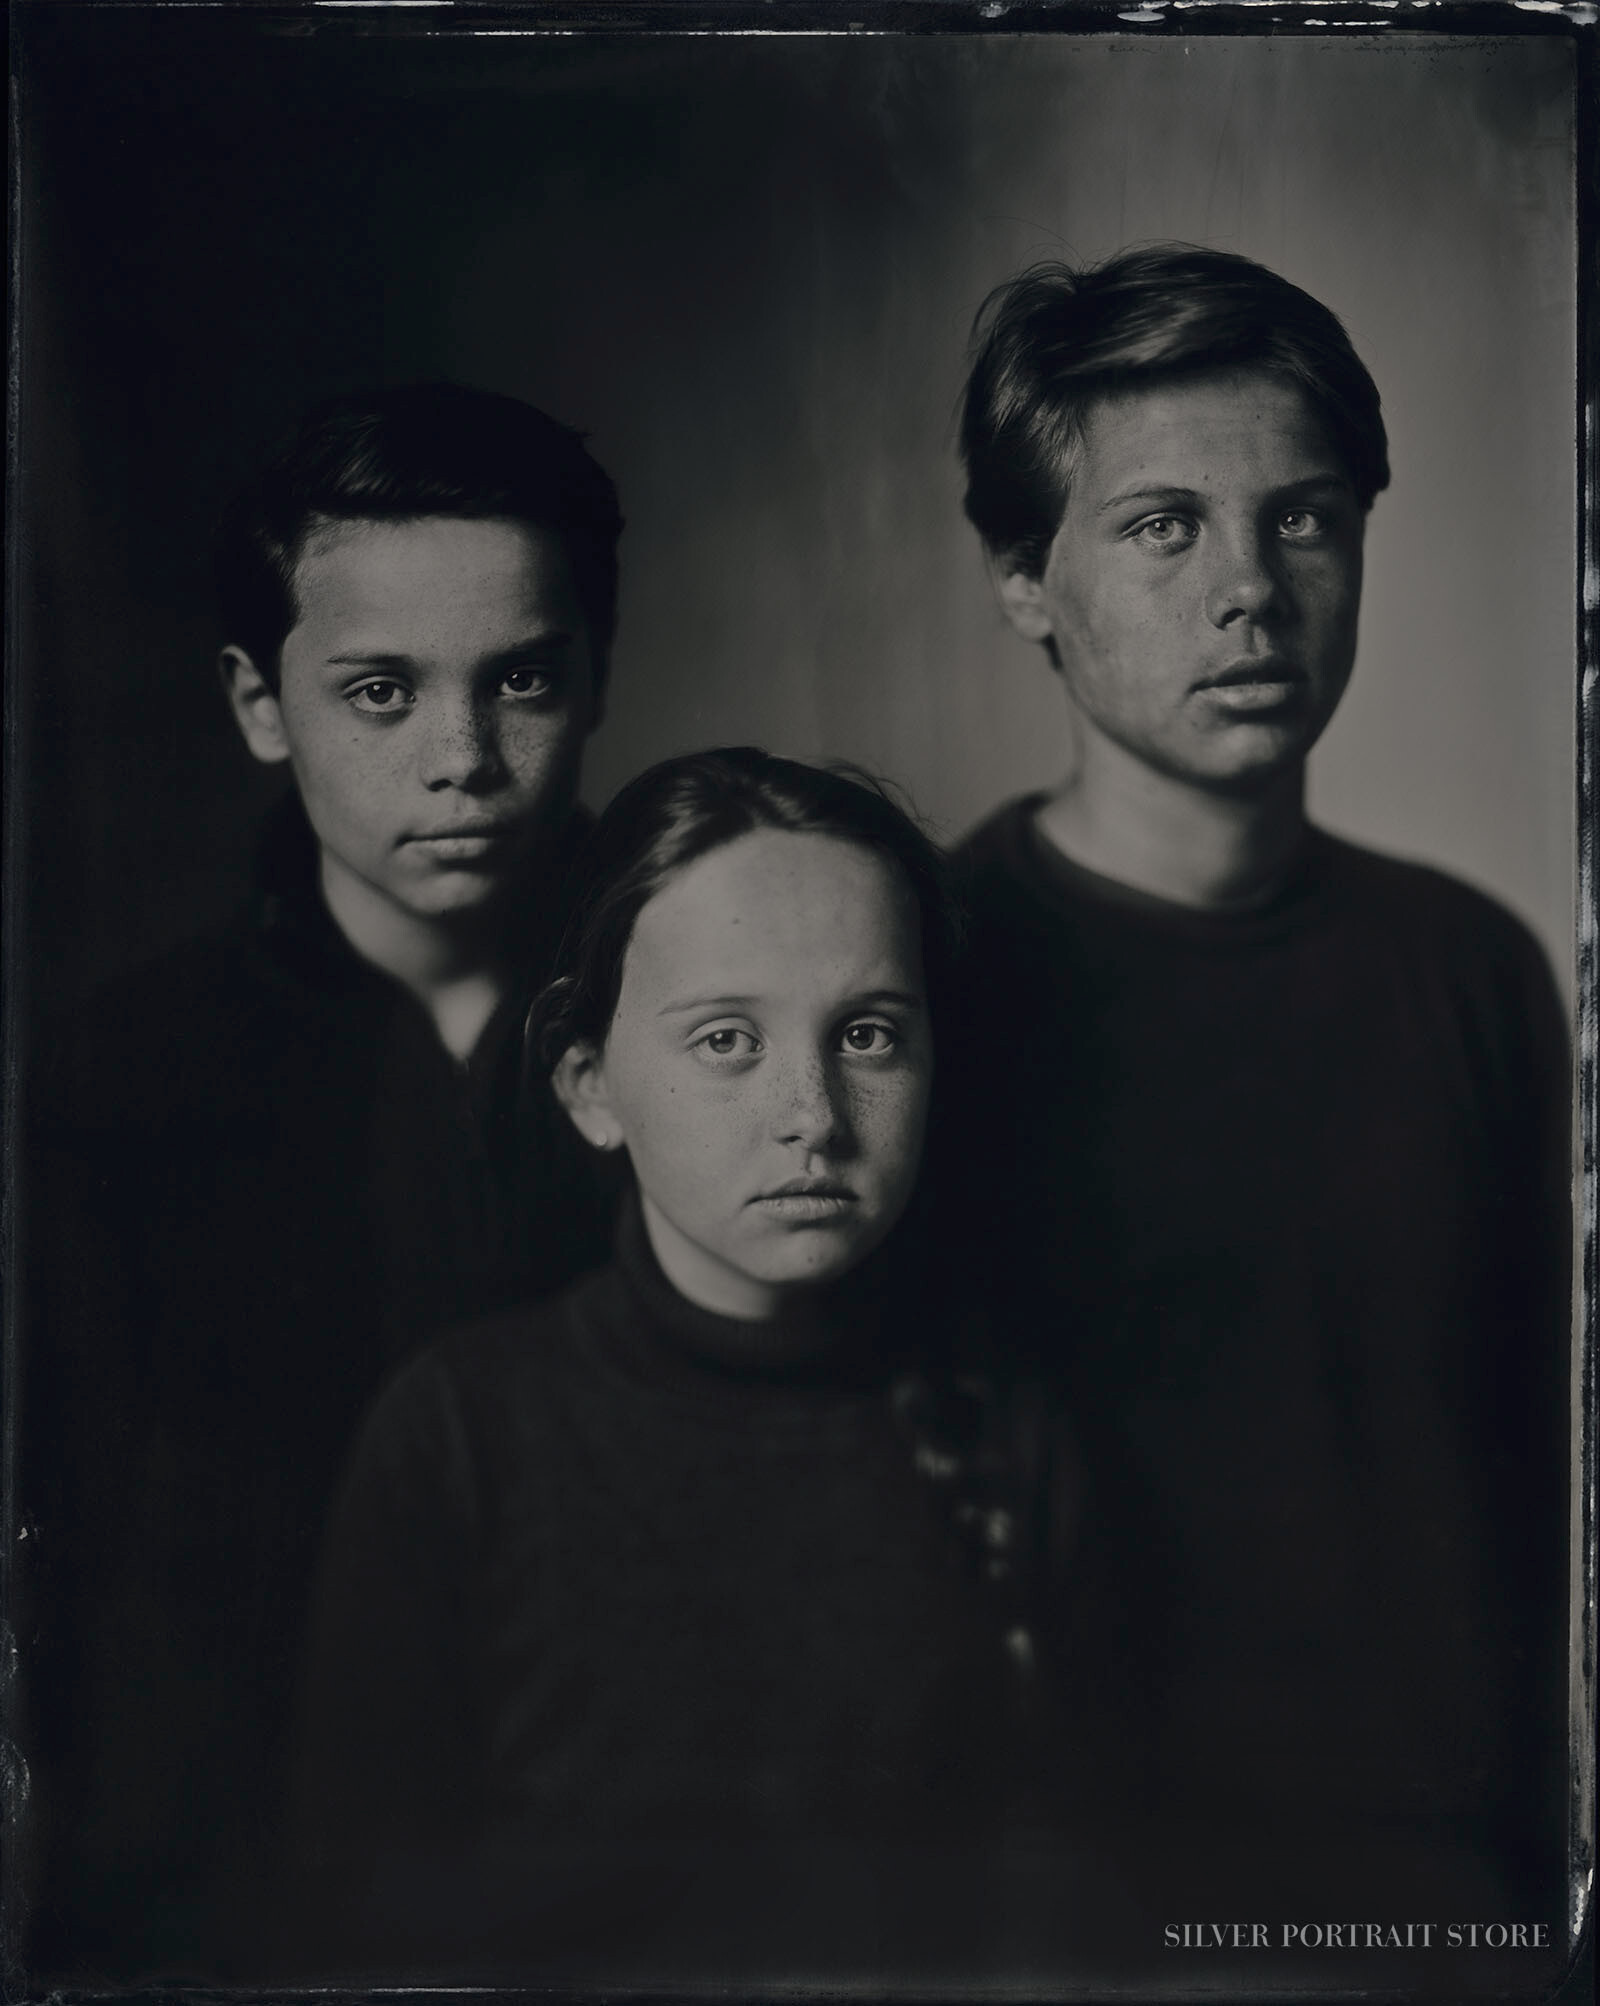 Jules, Jonathan & Valenthijn-Silver Portrait Store-Scan from Wet plate collodion-Tintype 20 x 25 cm.